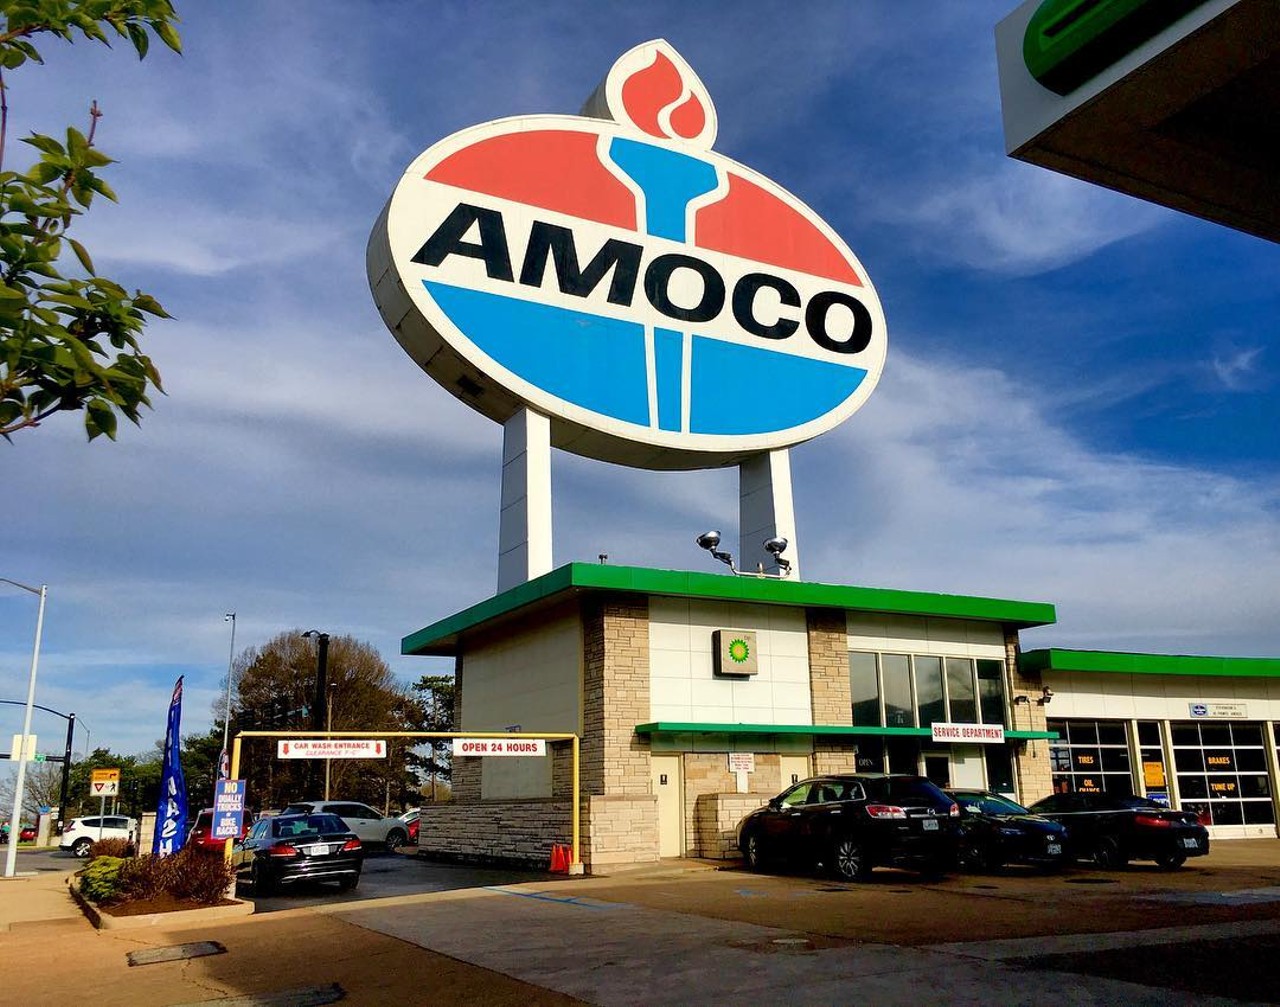 World's Largest Amoco Sign
981 S. Skinker Blvd., Skinker, MO
The Amoco brand hasn't been a real player for a decade, but they still rep the World's Largest Amoco Sign at this BP off Skinker in University City.
Photo courtesy of the_fotographer / Instagram